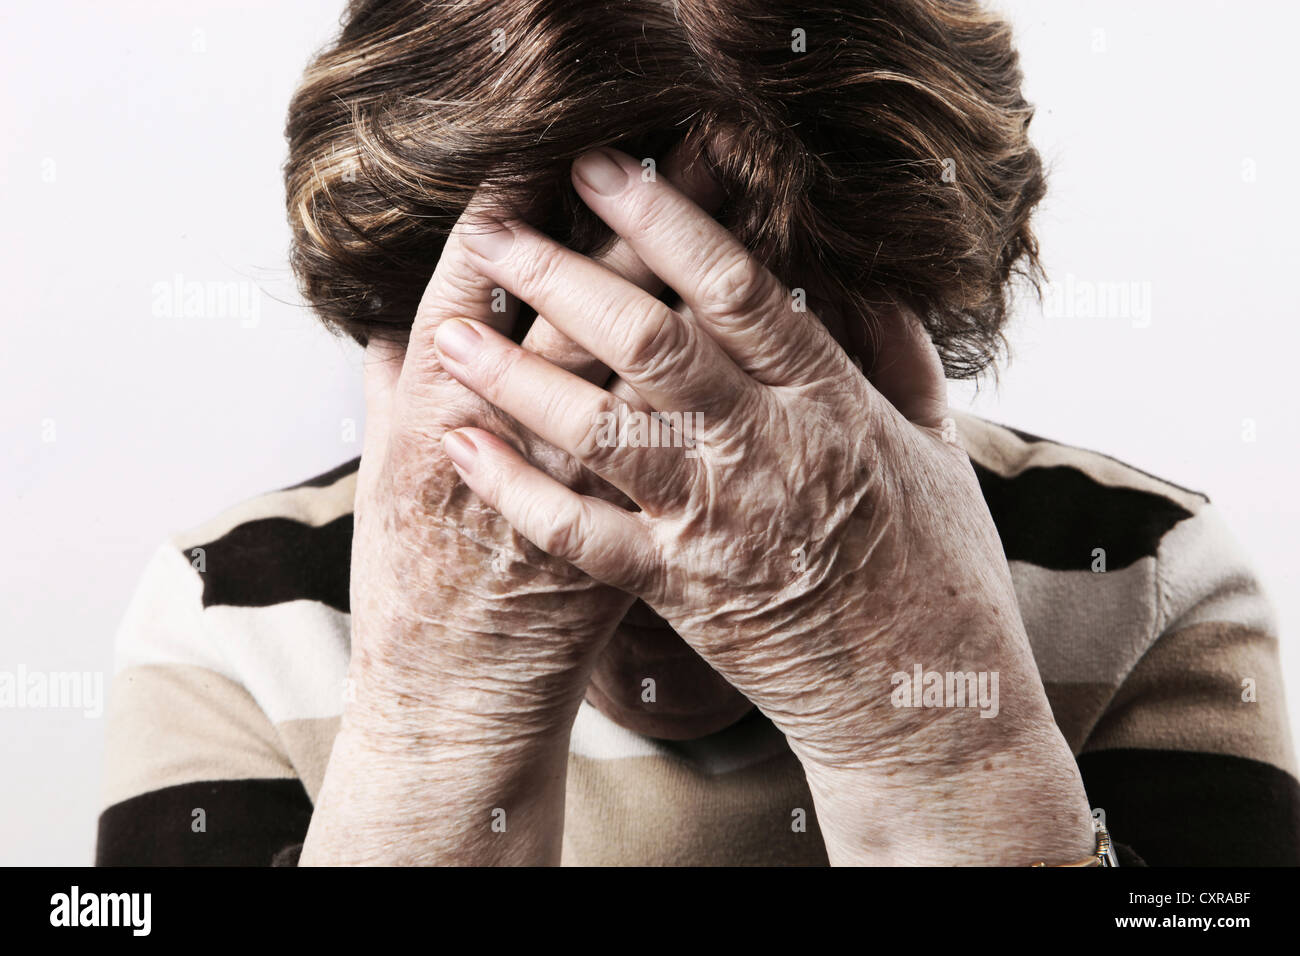 Elderly woman looking distressed and holding her hands over her face Stock Photo